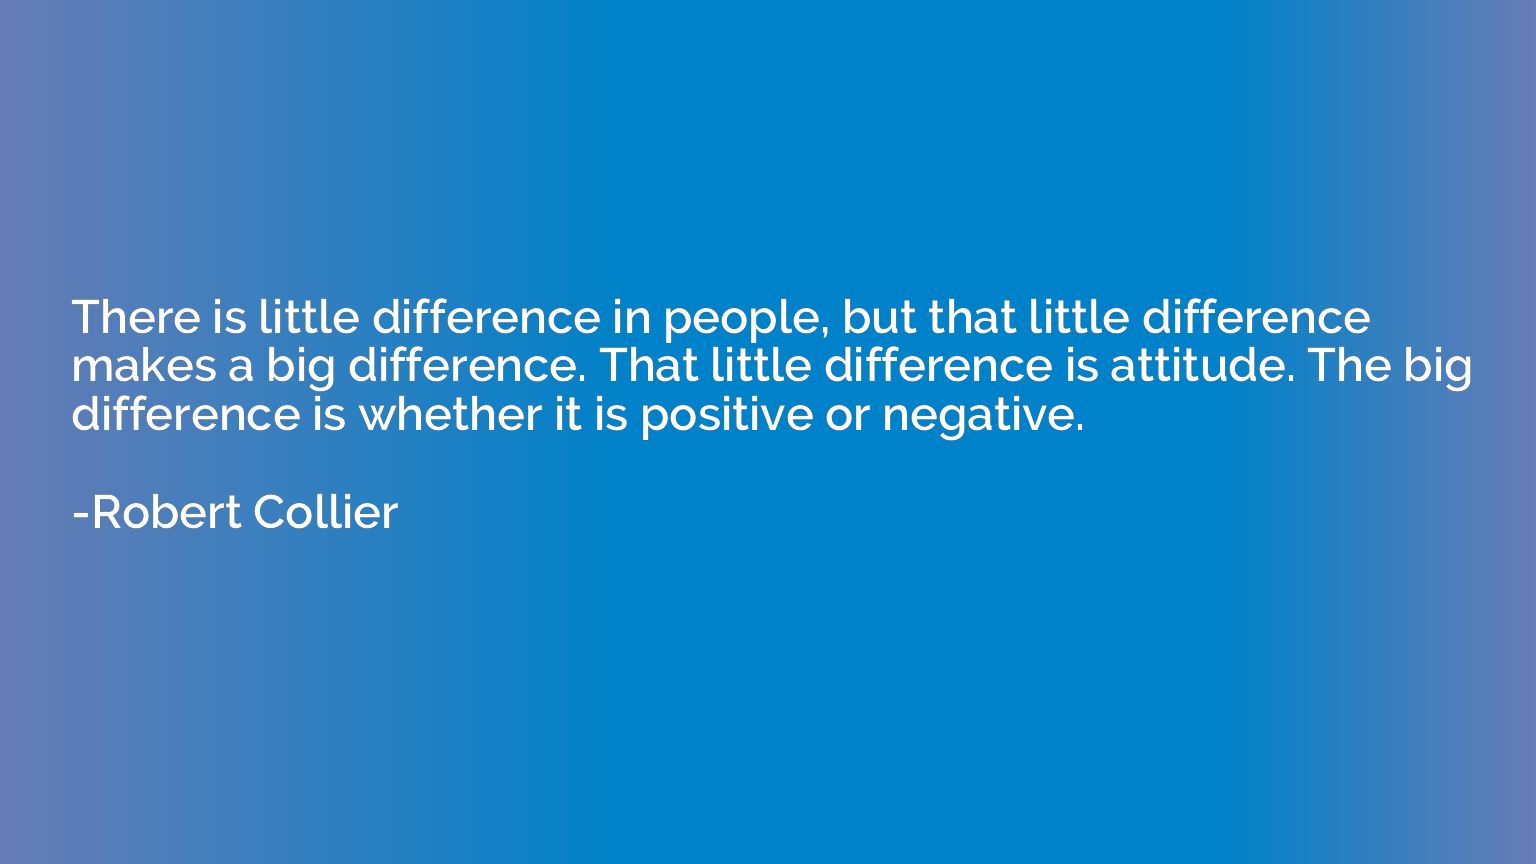 There is little difference in people, but that little differ